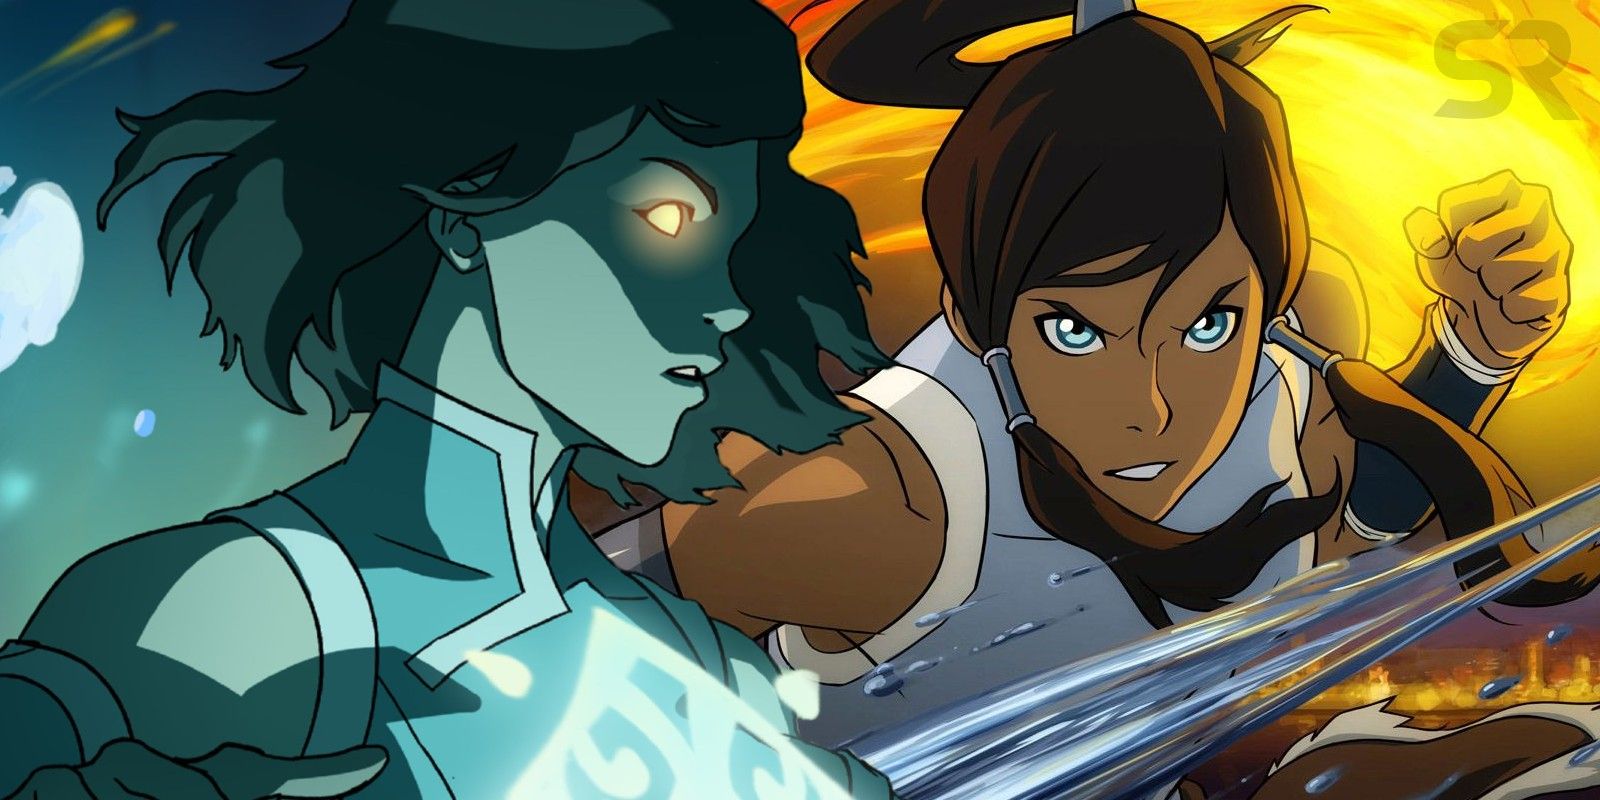 Fun Facts about the Legend of Korra Video Game